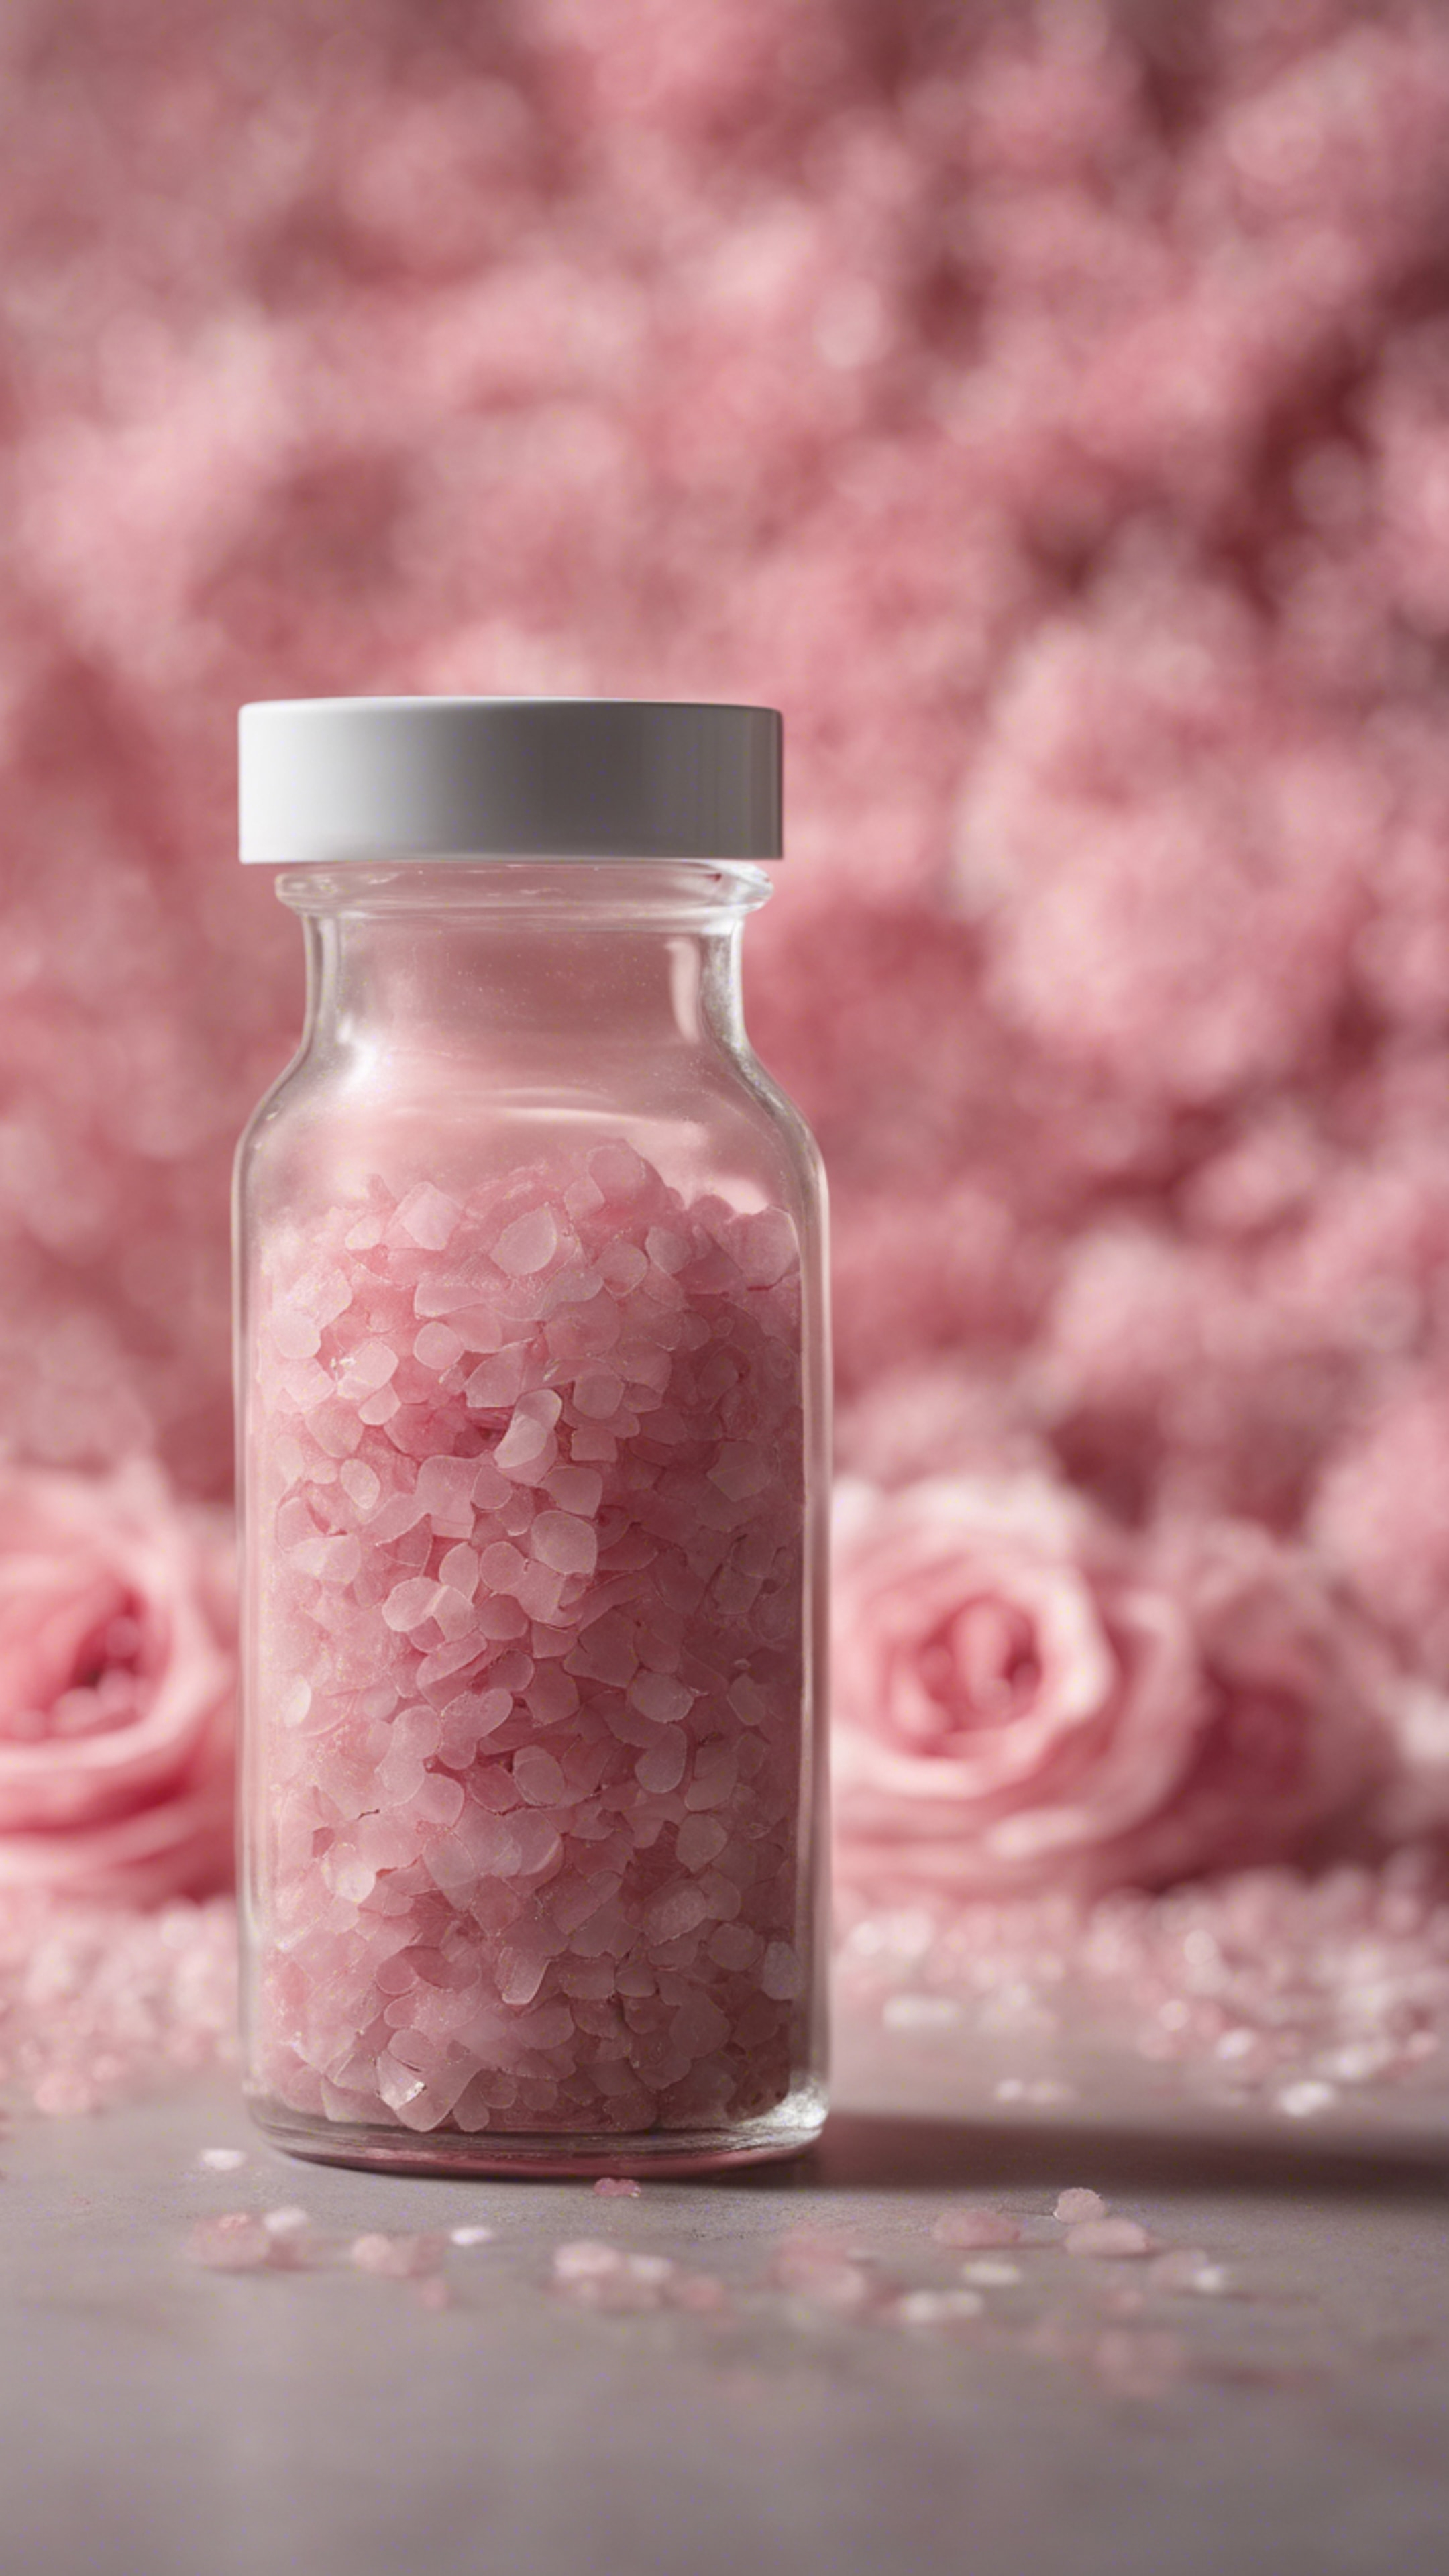 A modern, minimalist, recycled glass bottle filled with rose-colored bath salts against a concrete backdrop. Tapéta[d3334b5ed23046b498f0]